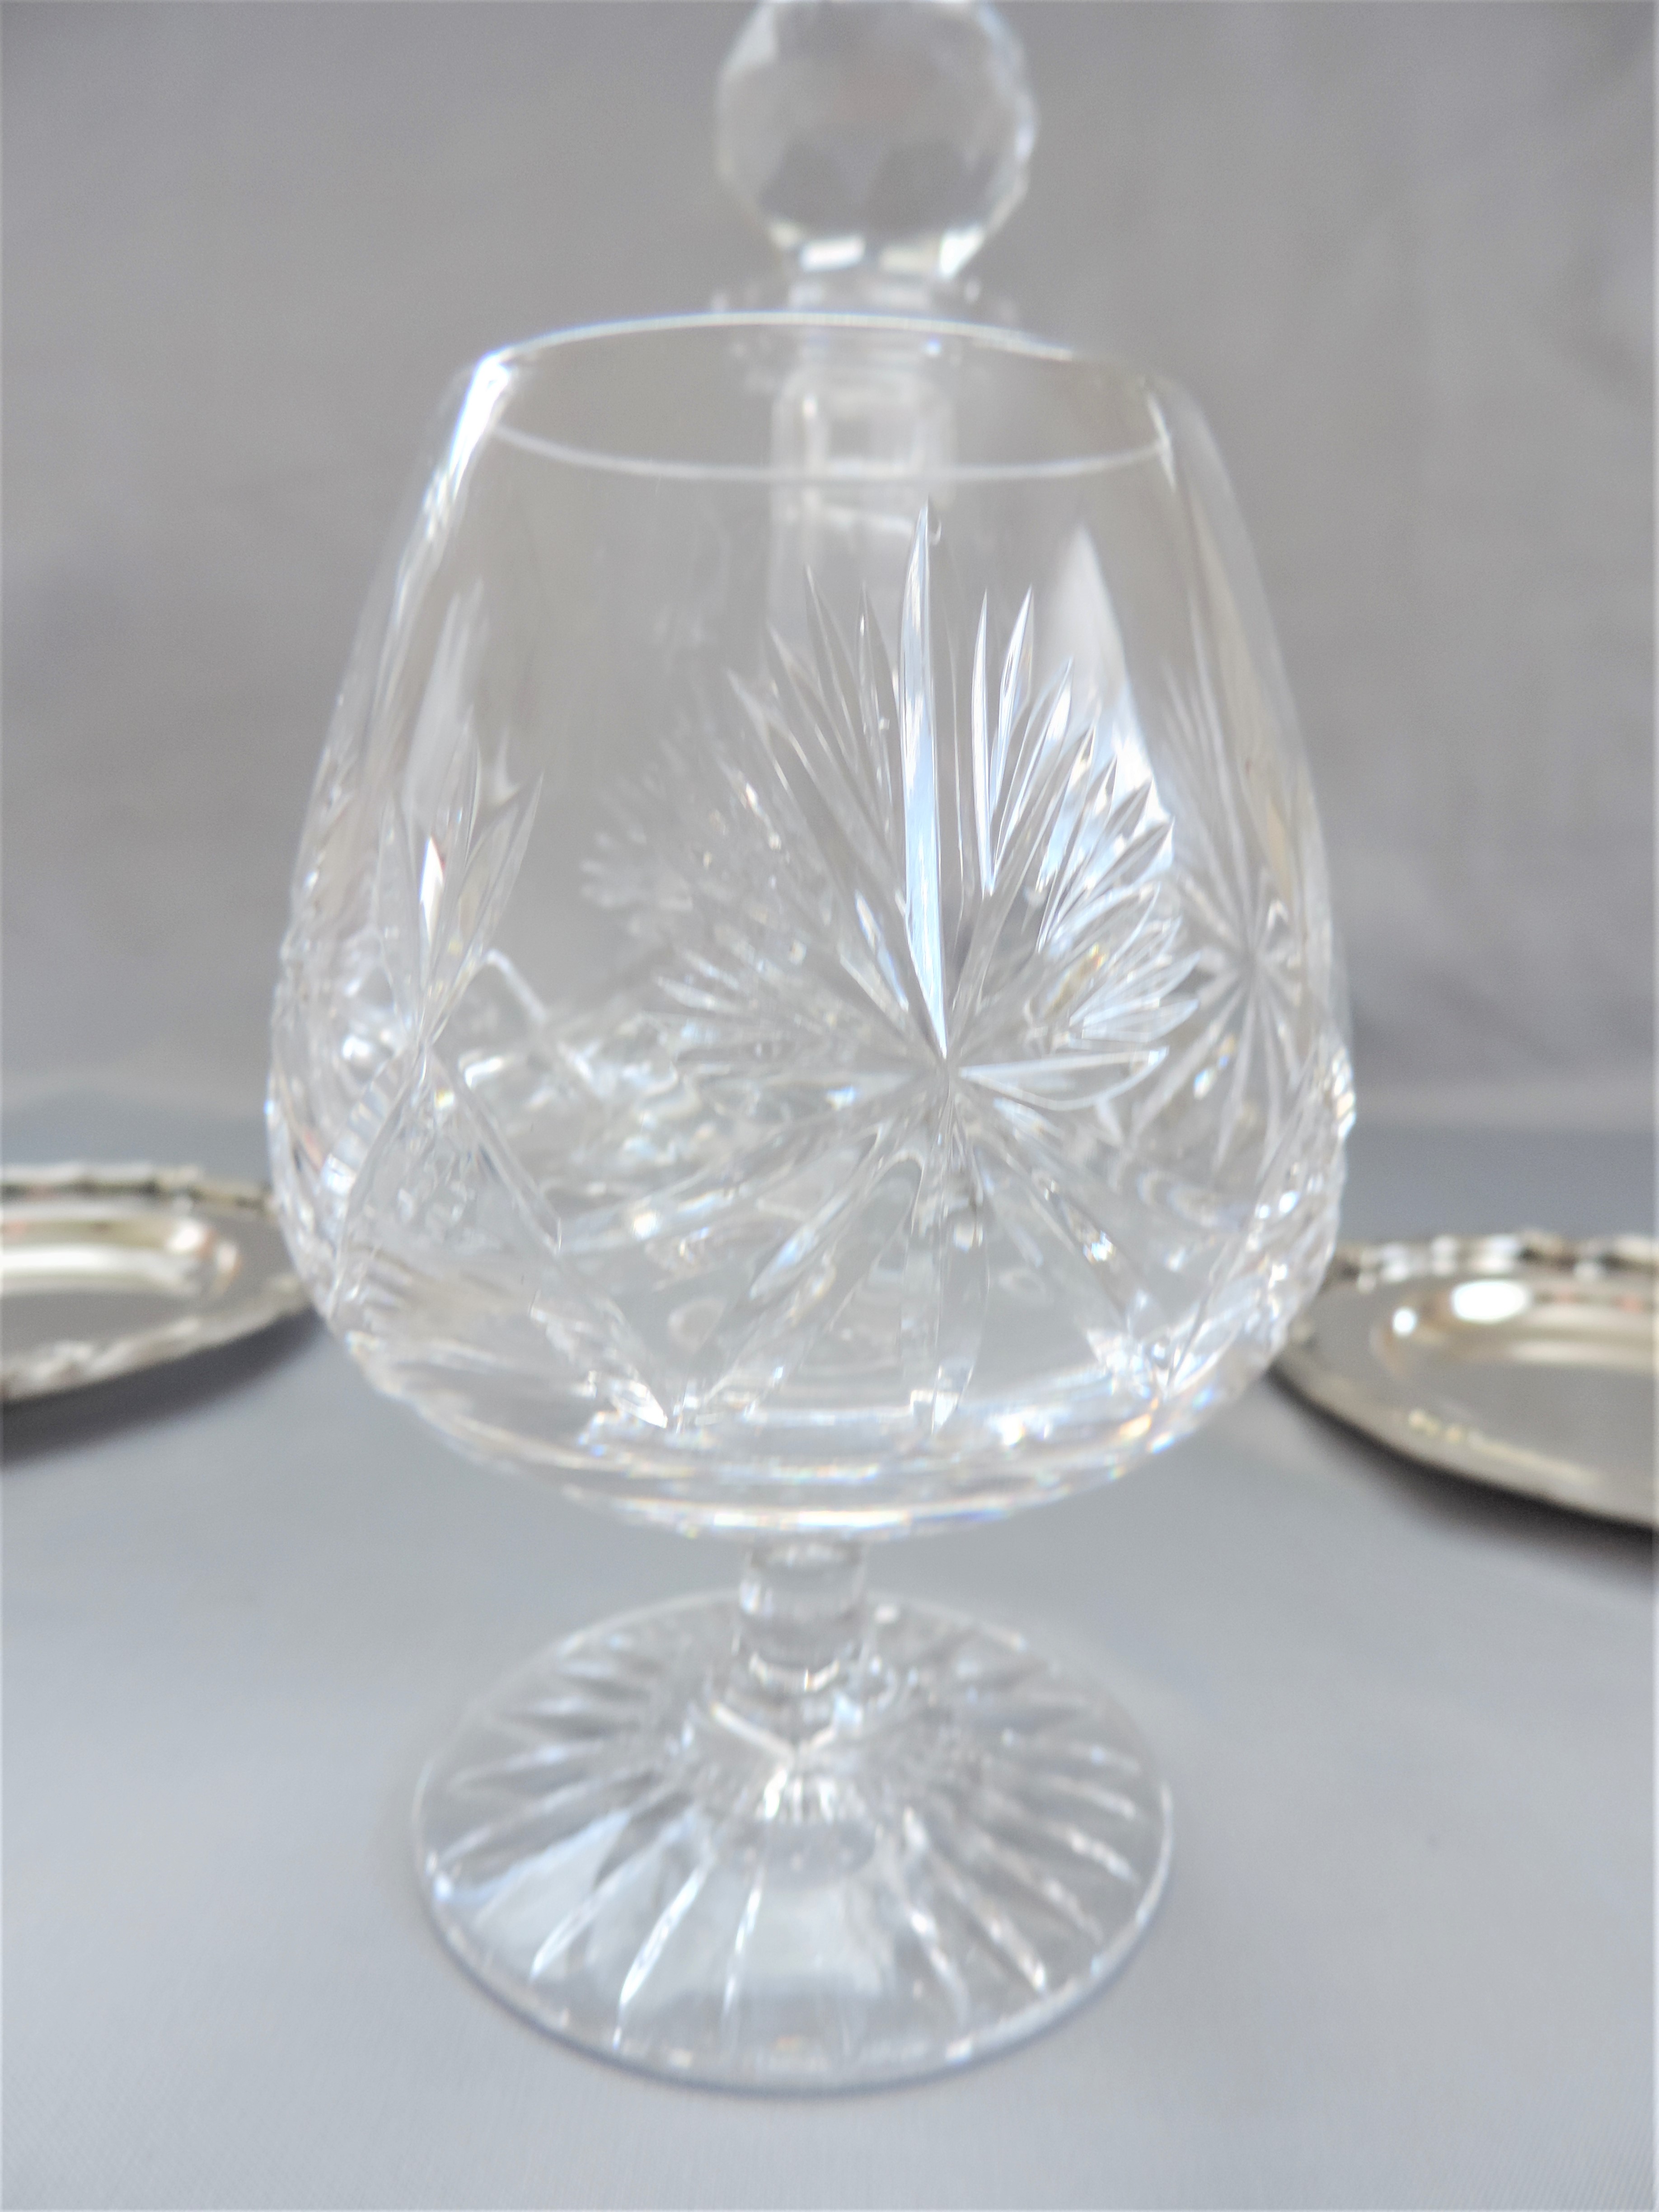 Crystal Brandy Decanter and Glasses - Image 5 of 6